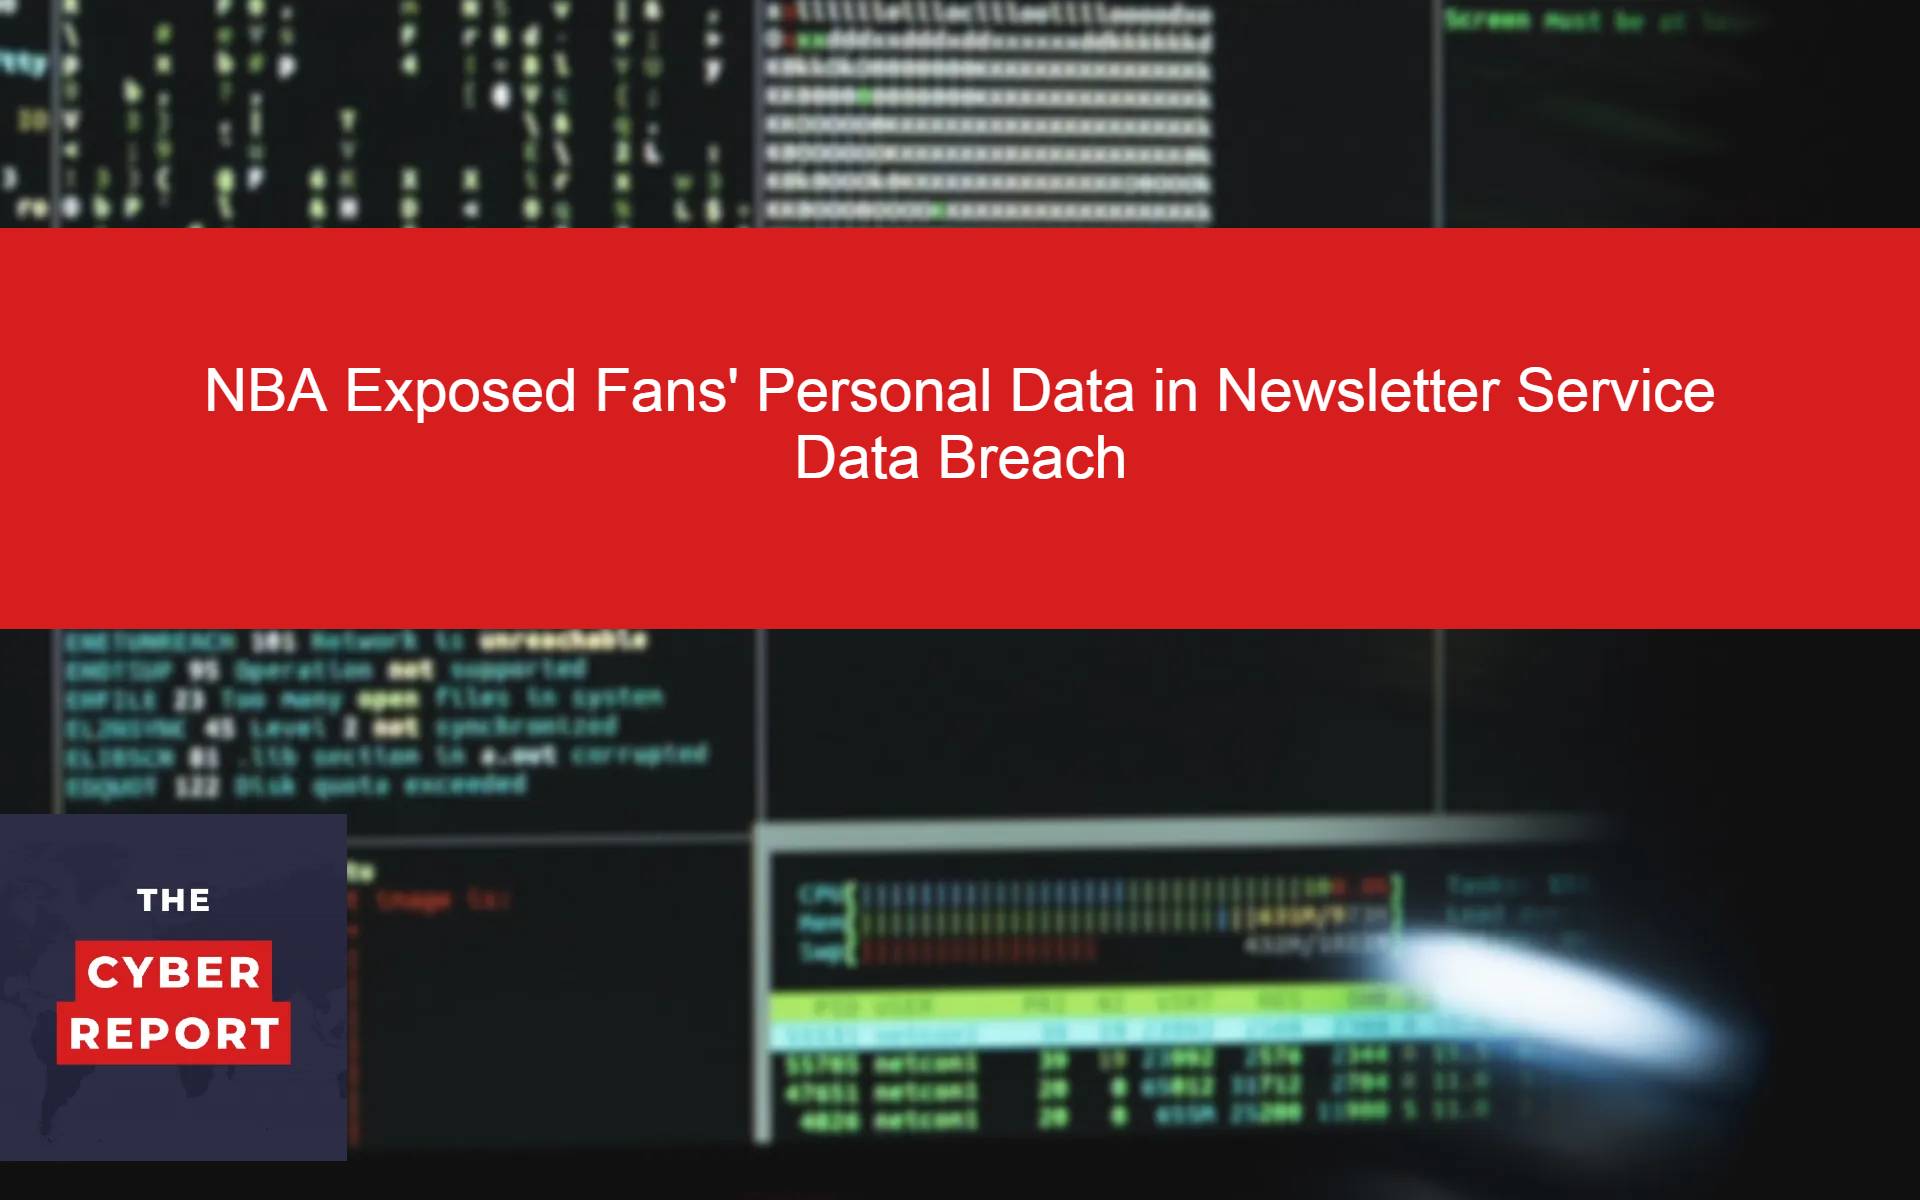 NBA Exposed Fans' Personal Data in Newsletter Service Data Breach